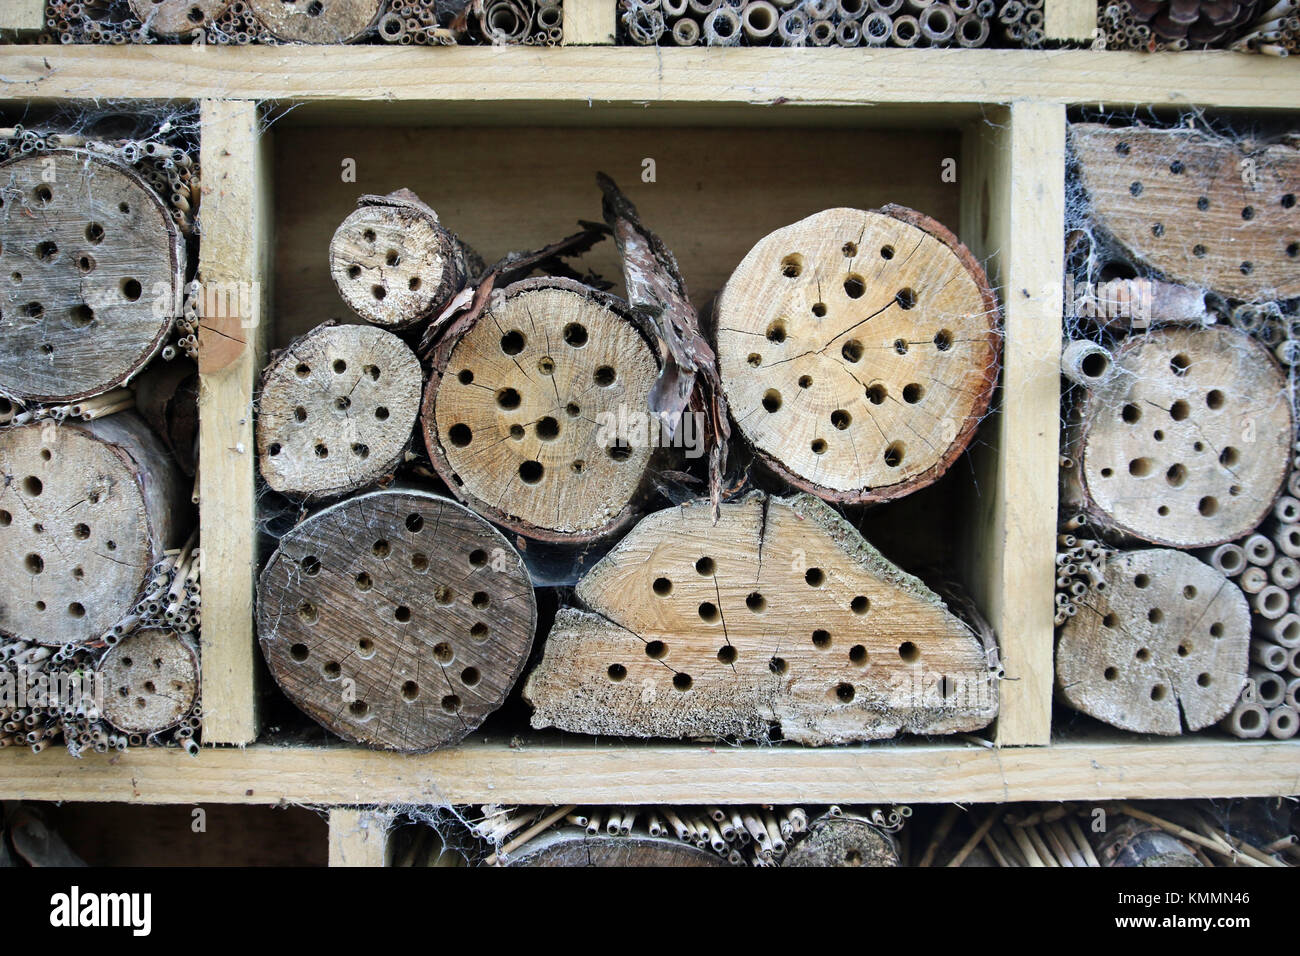 Bug hotel in a wooden frame for insects to breed and overwinter in with holes drilled in logs, grass stems and bamboo canes. Stock Photo